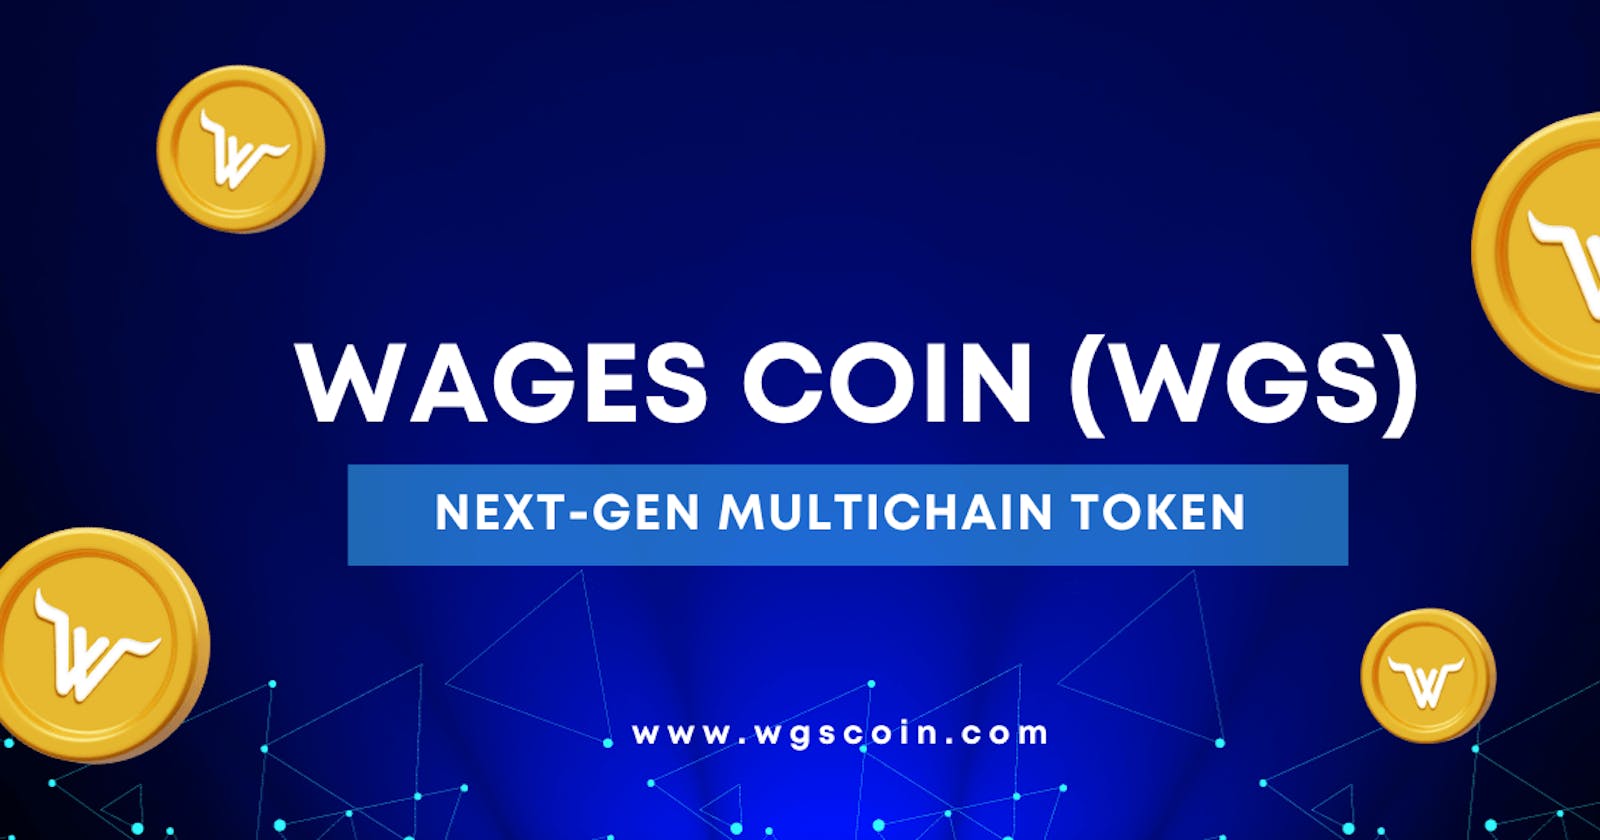 Things to Know About Wages Coin (WGS)